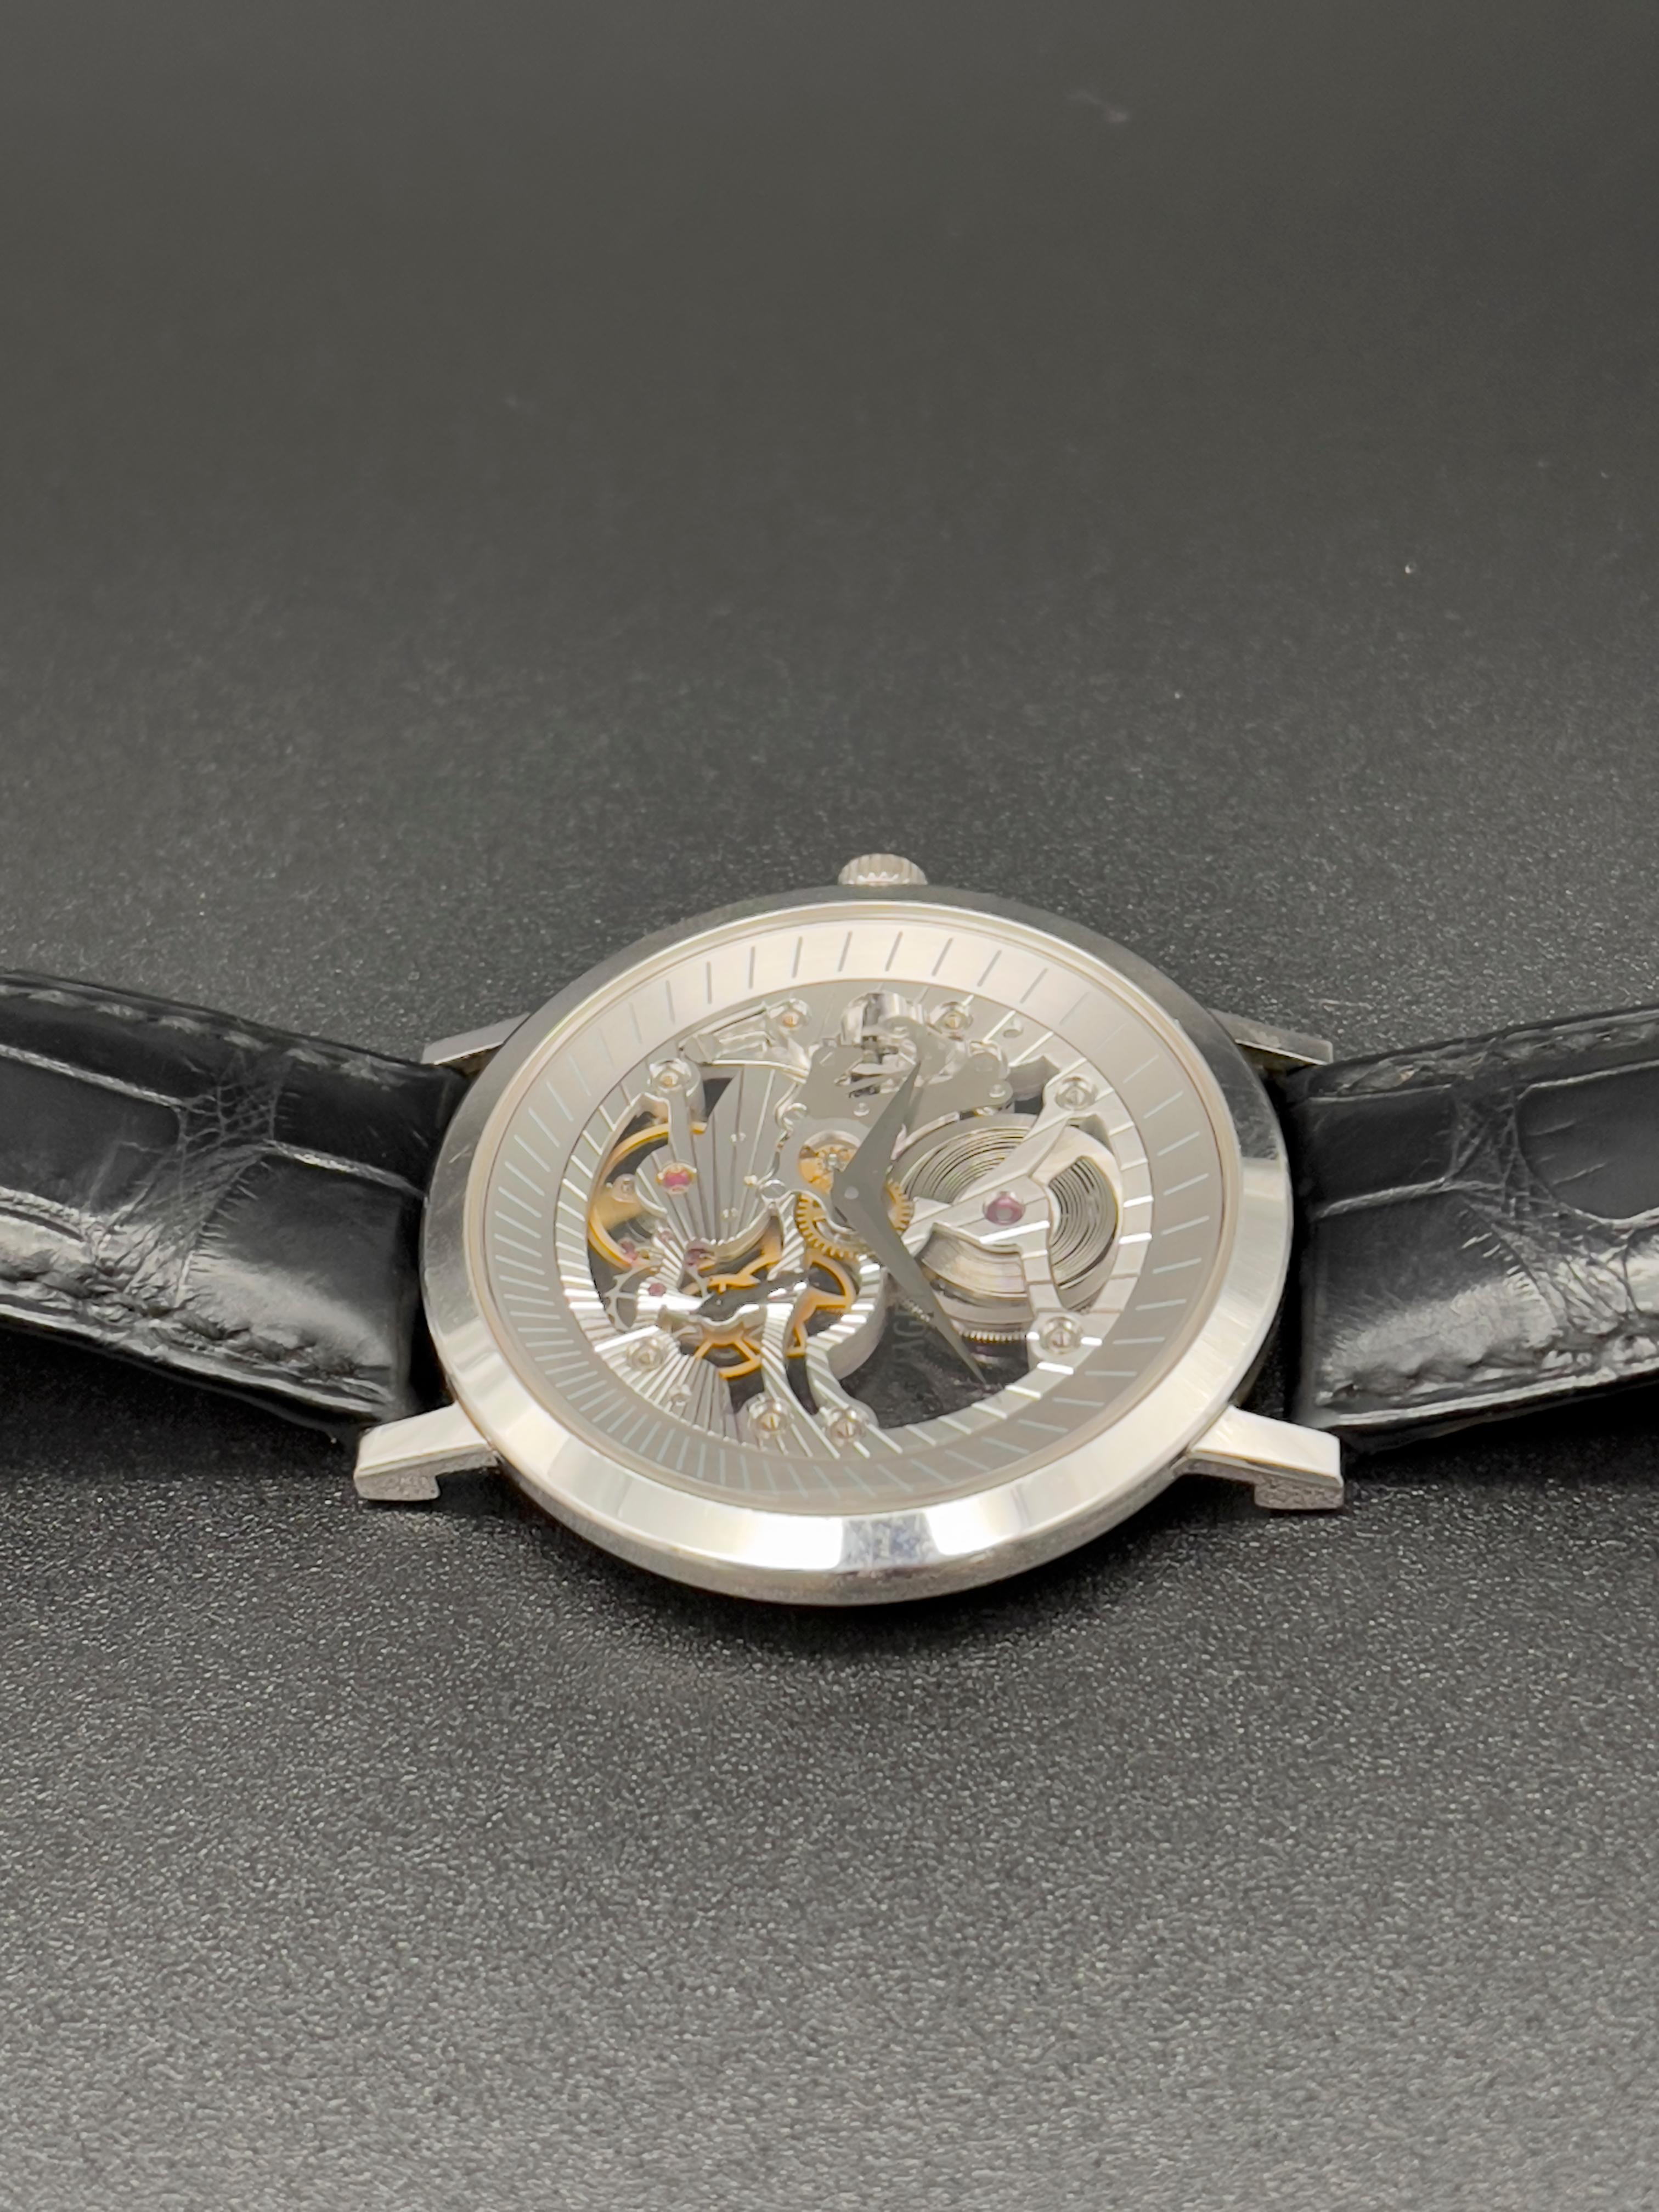 Piaget White Gold Altiplano Skeleton G0A33115 Manual-Wind Wristwatch In Excellent Condition For Sale In Viana do Castelo, PT